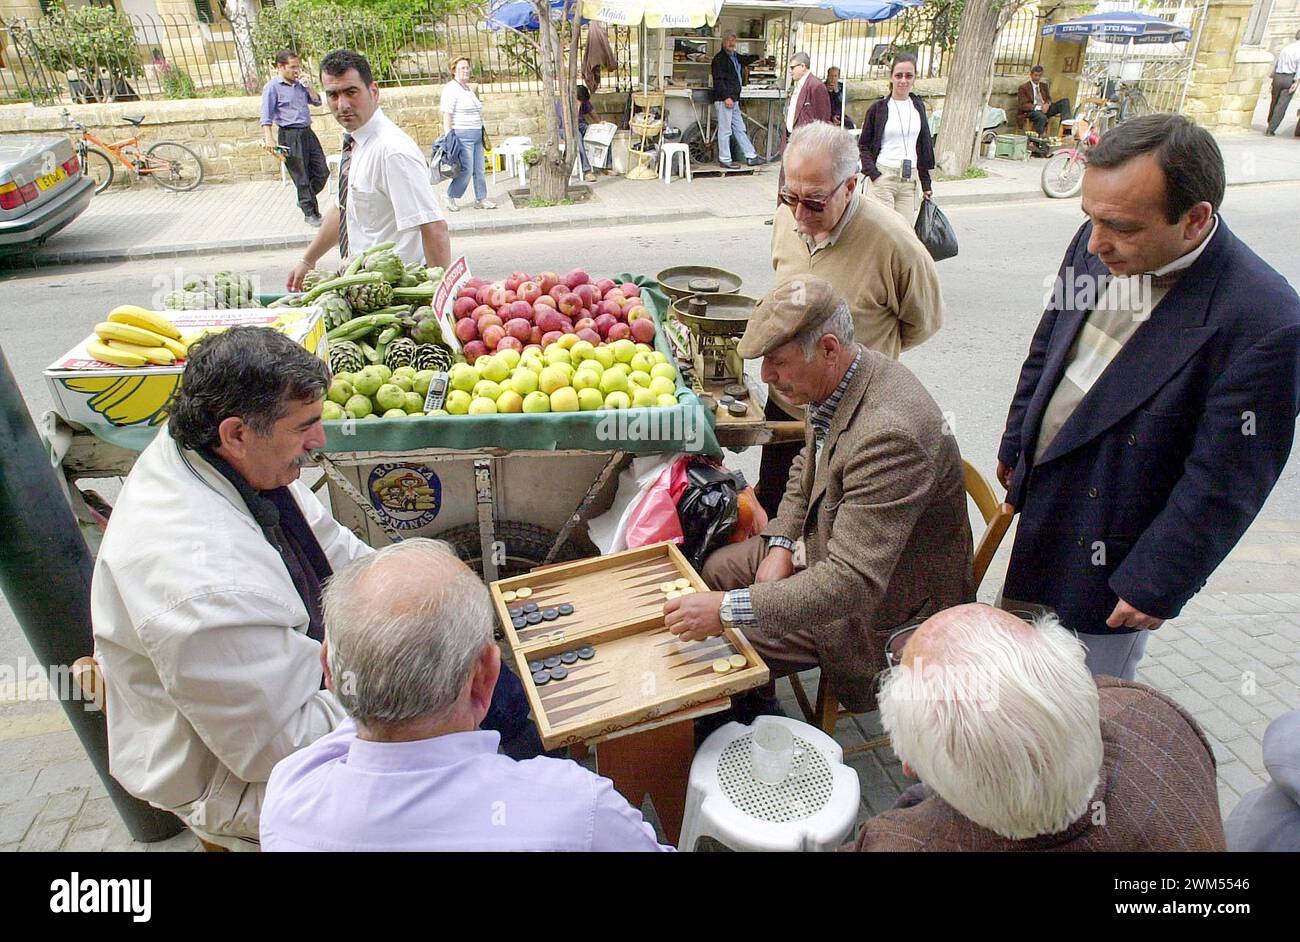 The merchant in northern Nicosia always likes to park his fruit cart on the side of the road for a good game of tavla (backgammon). Stock Photo